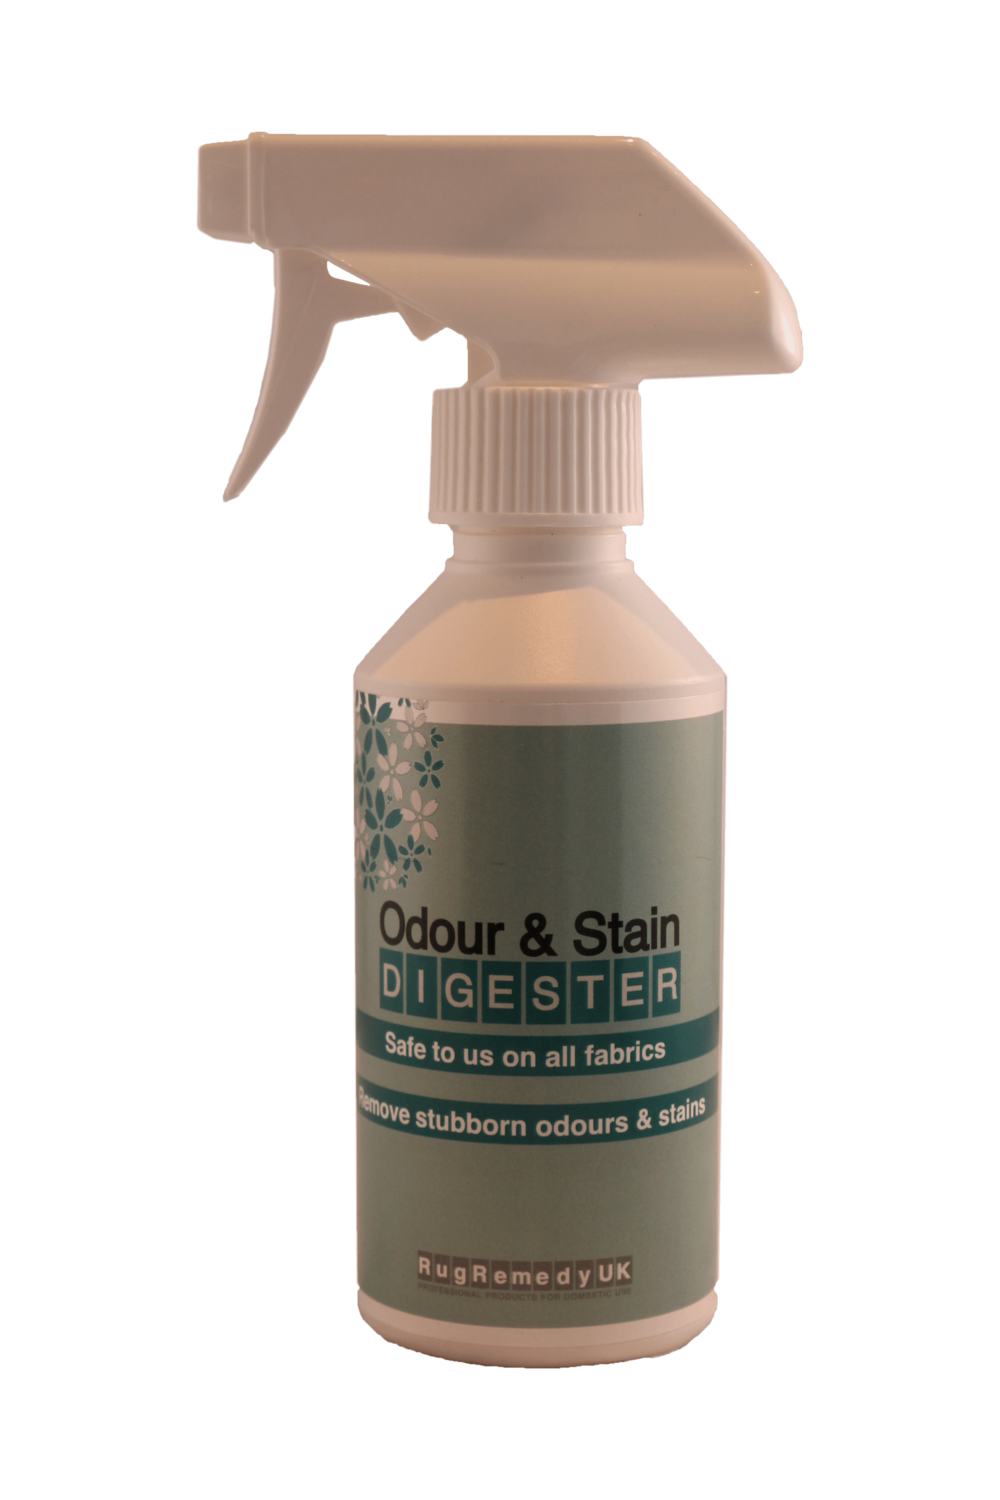 Odour & Stain Digester